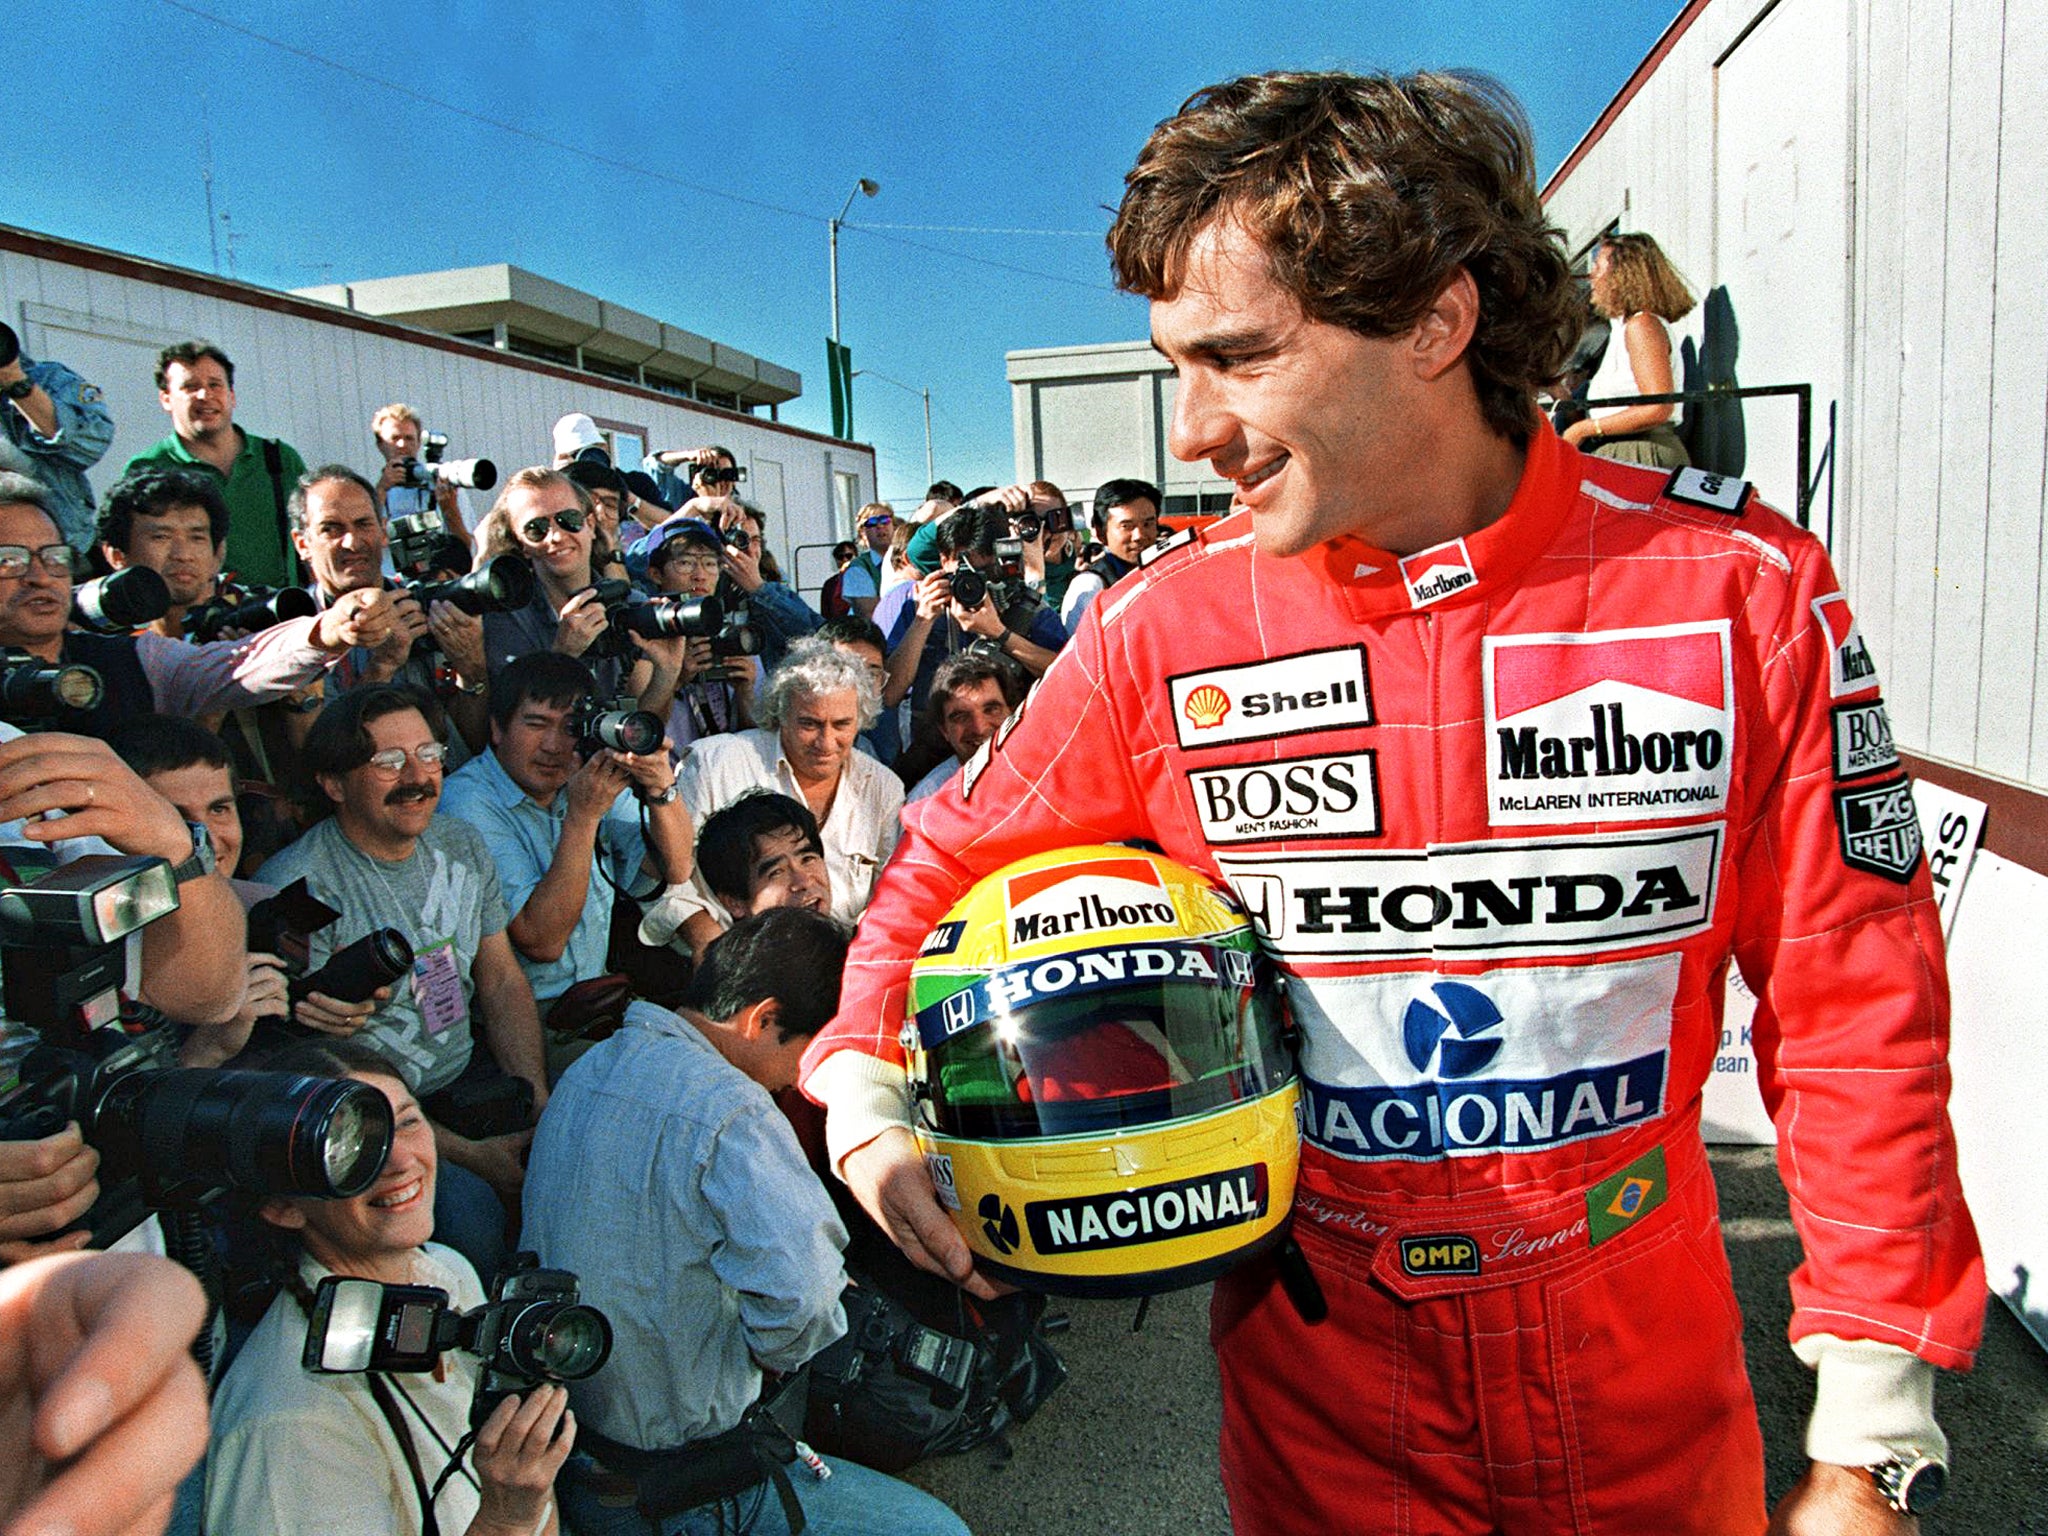 Ayrton Senna, the defending champion, poses for photographers in Phoenix on the eve of the 1991 F1 season